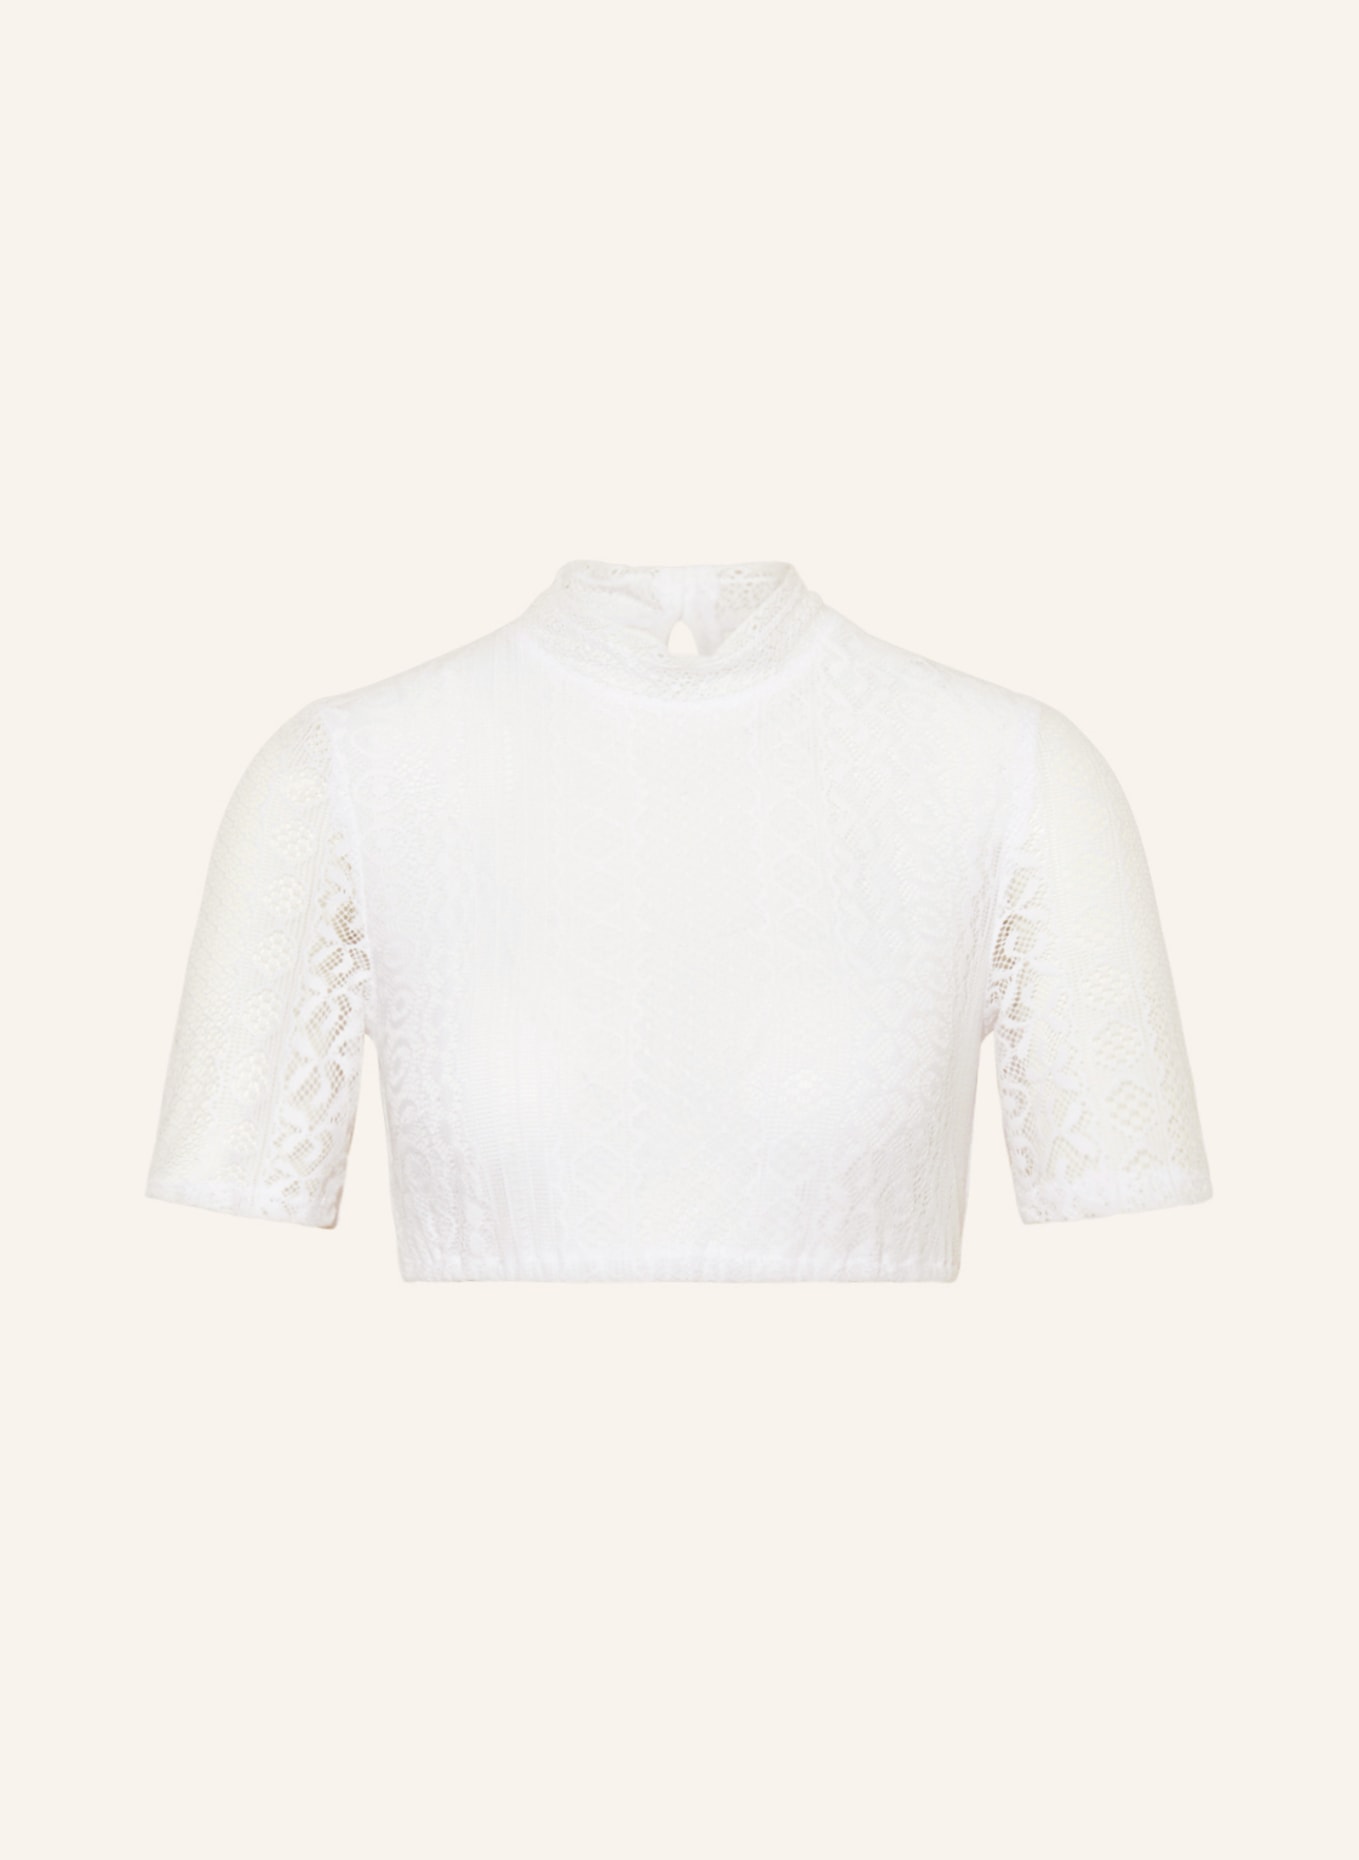 WALDORFF Dirndl blouse made of lace, Color: WHITE (Image 1)